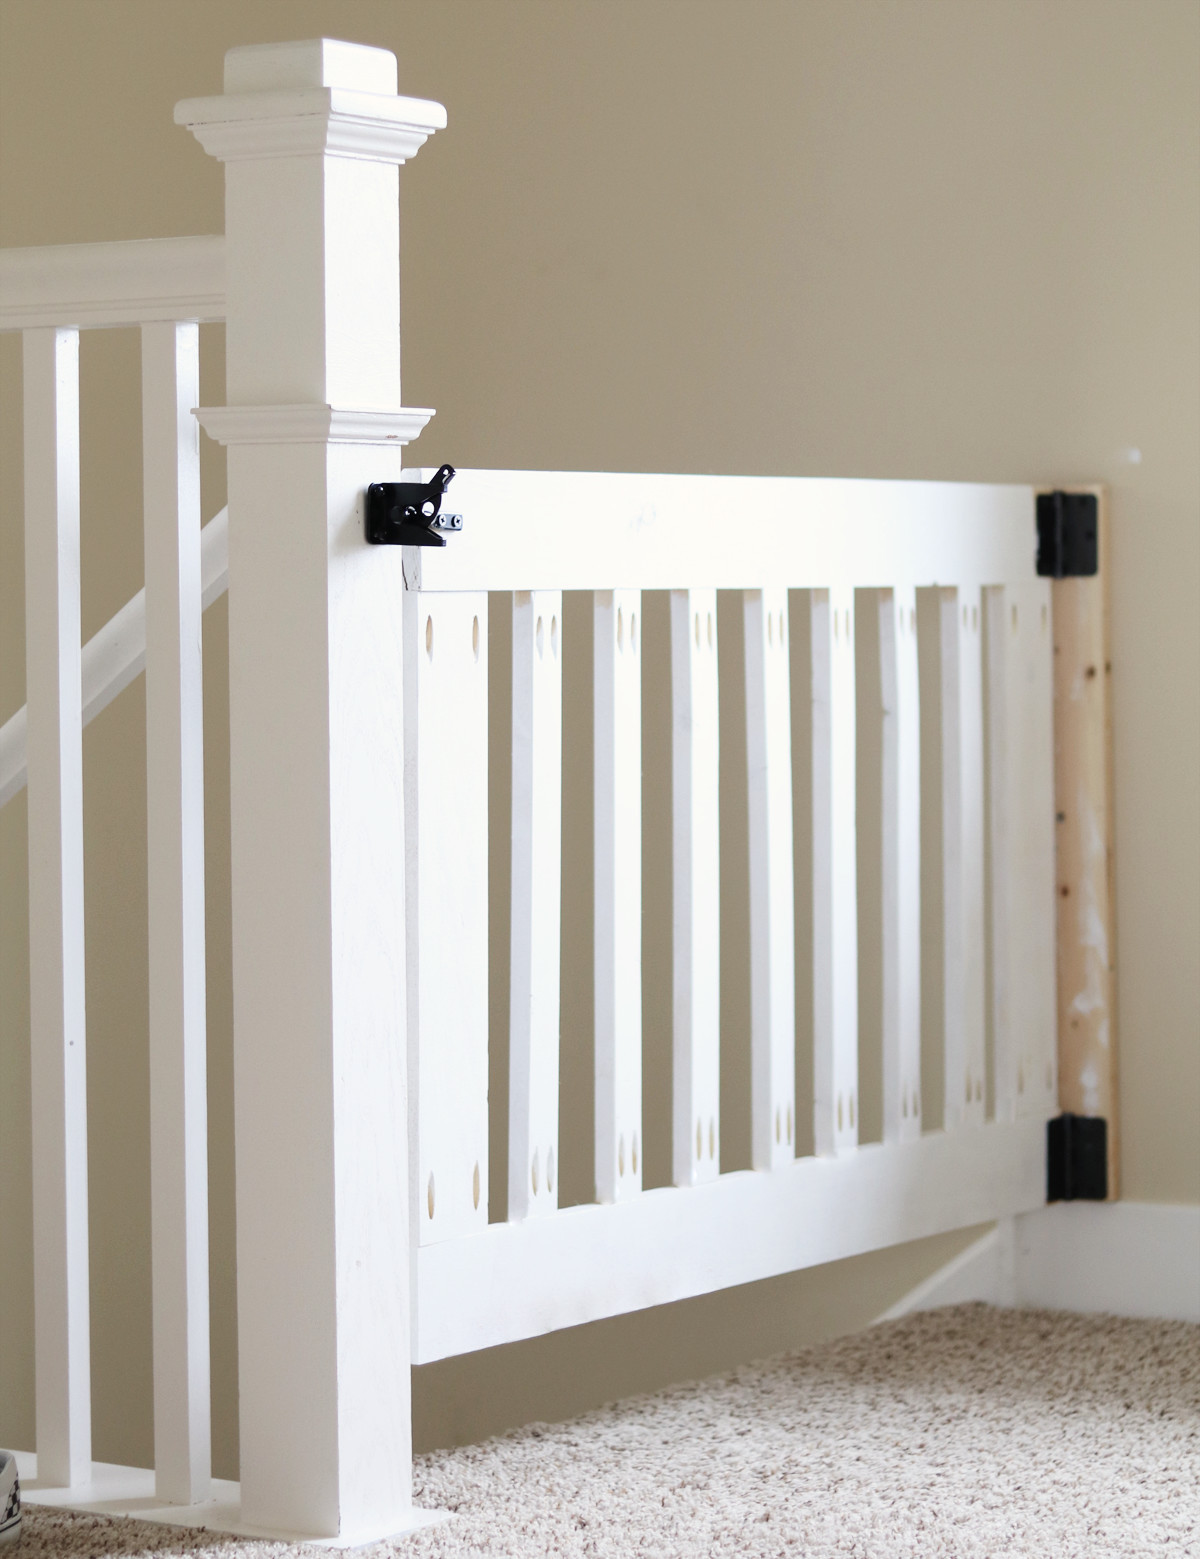 DIY Baby Gate Stairs
 Diy Baby Gate For Stairs Do It Your Self